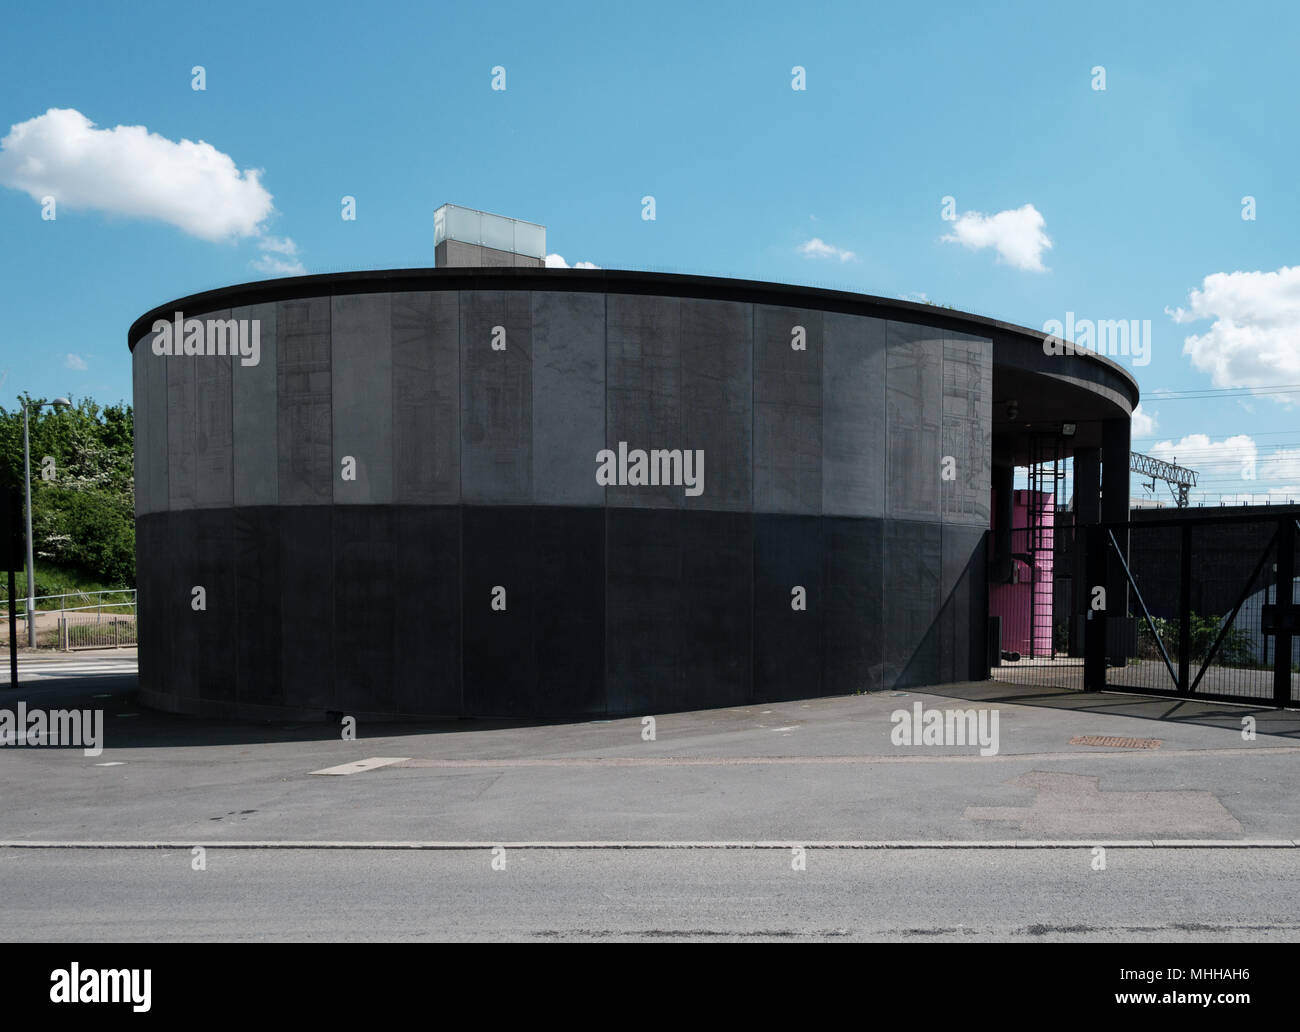 Sewarage pumping station at Pudding Mill Lane, East London, constructed as part of the Olympic project. Architects Lyall Bills & Young . Stock Photo